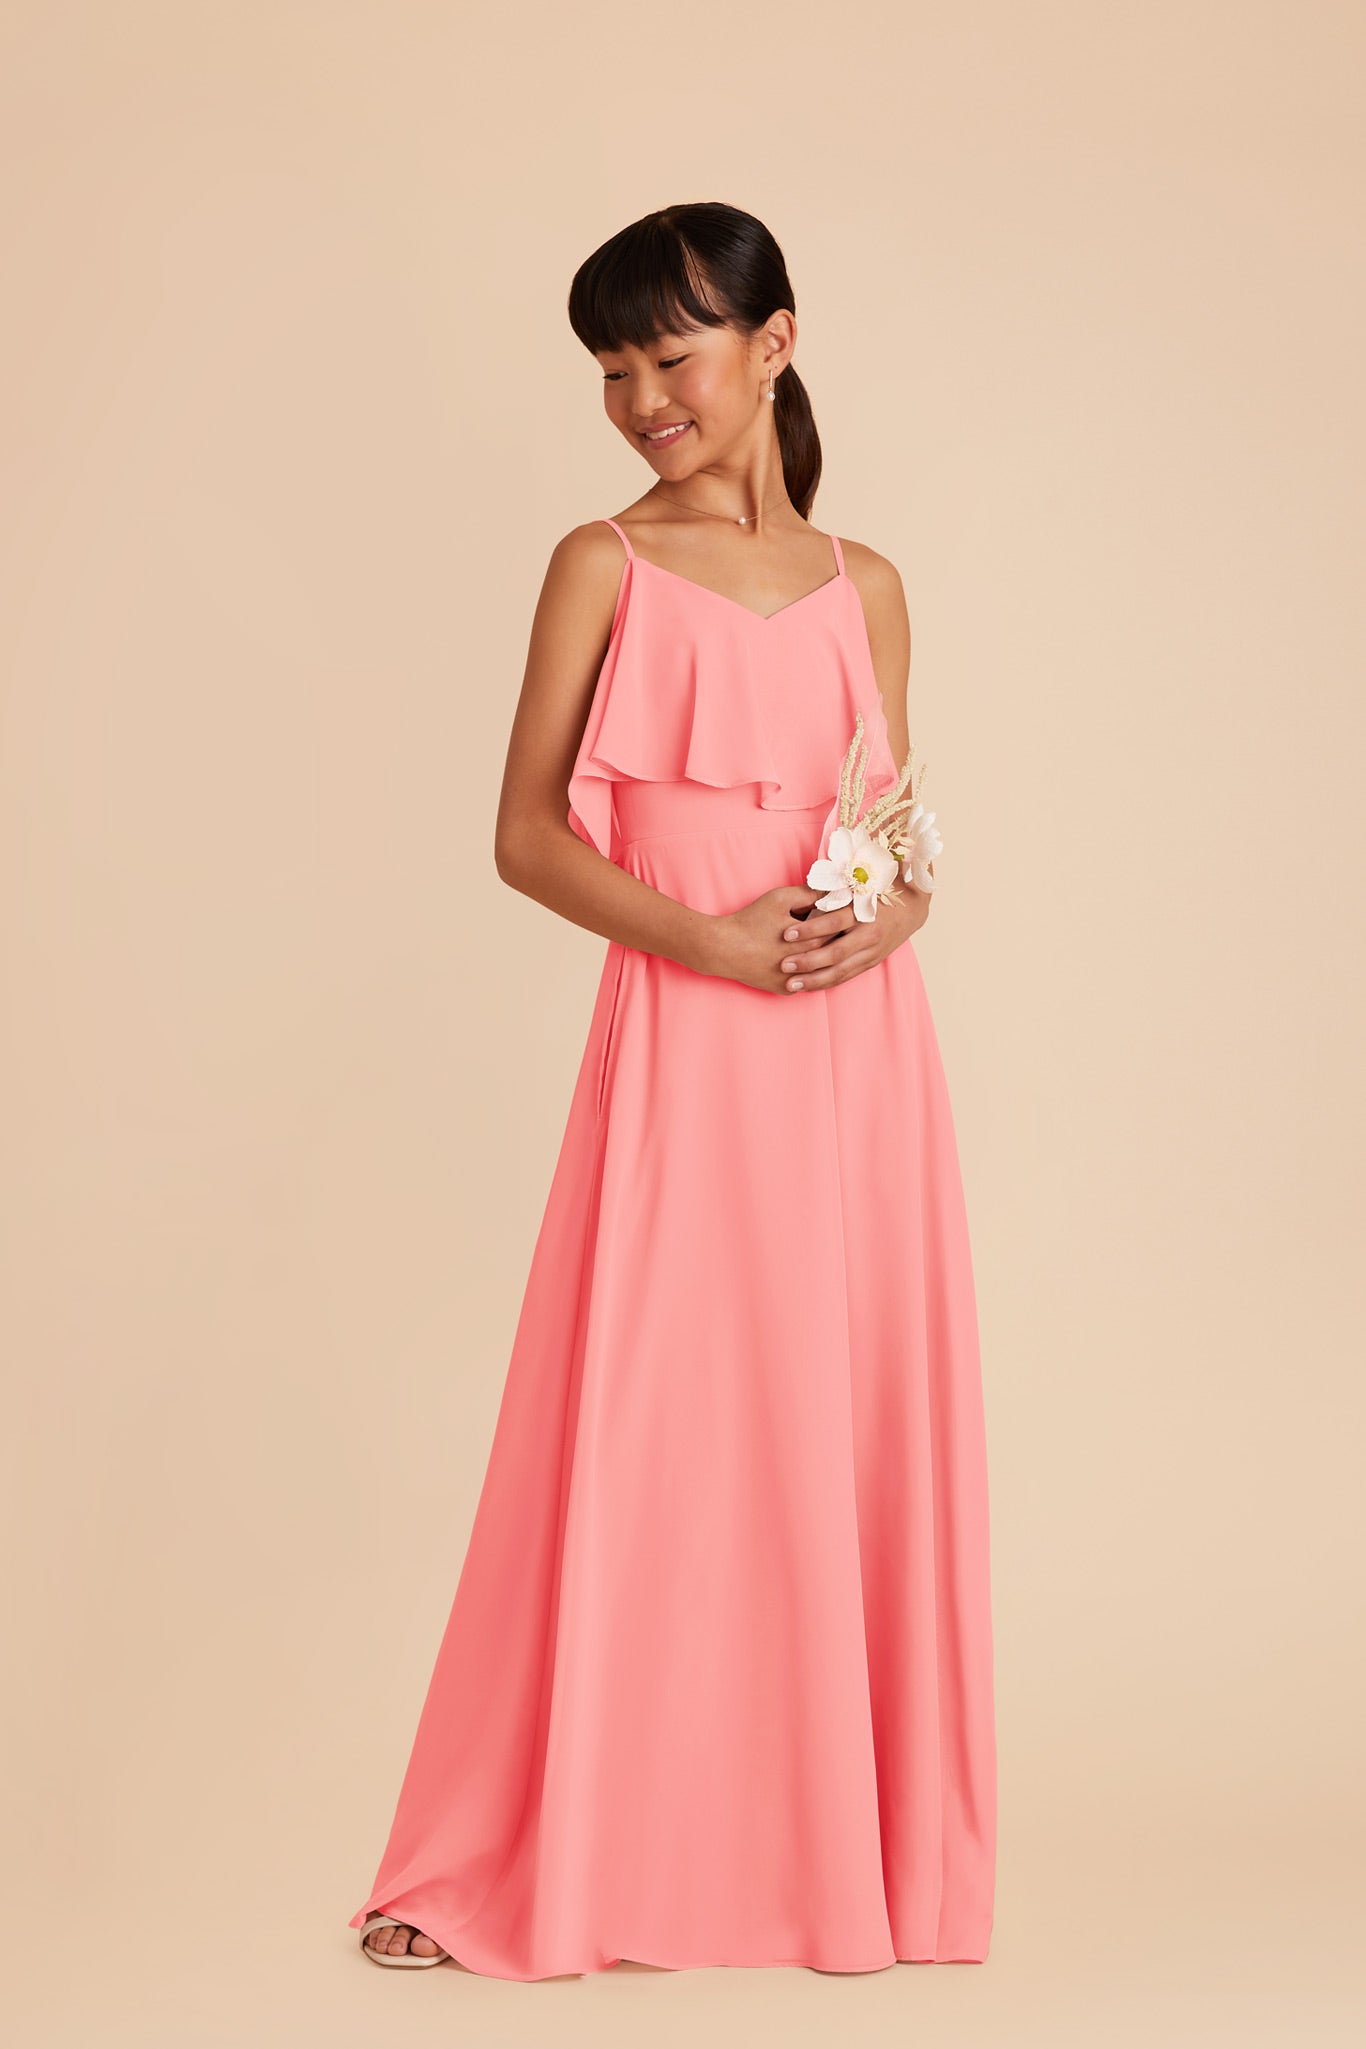 Coral Pink Janie Convertible Junior Dress by Birdy Grey